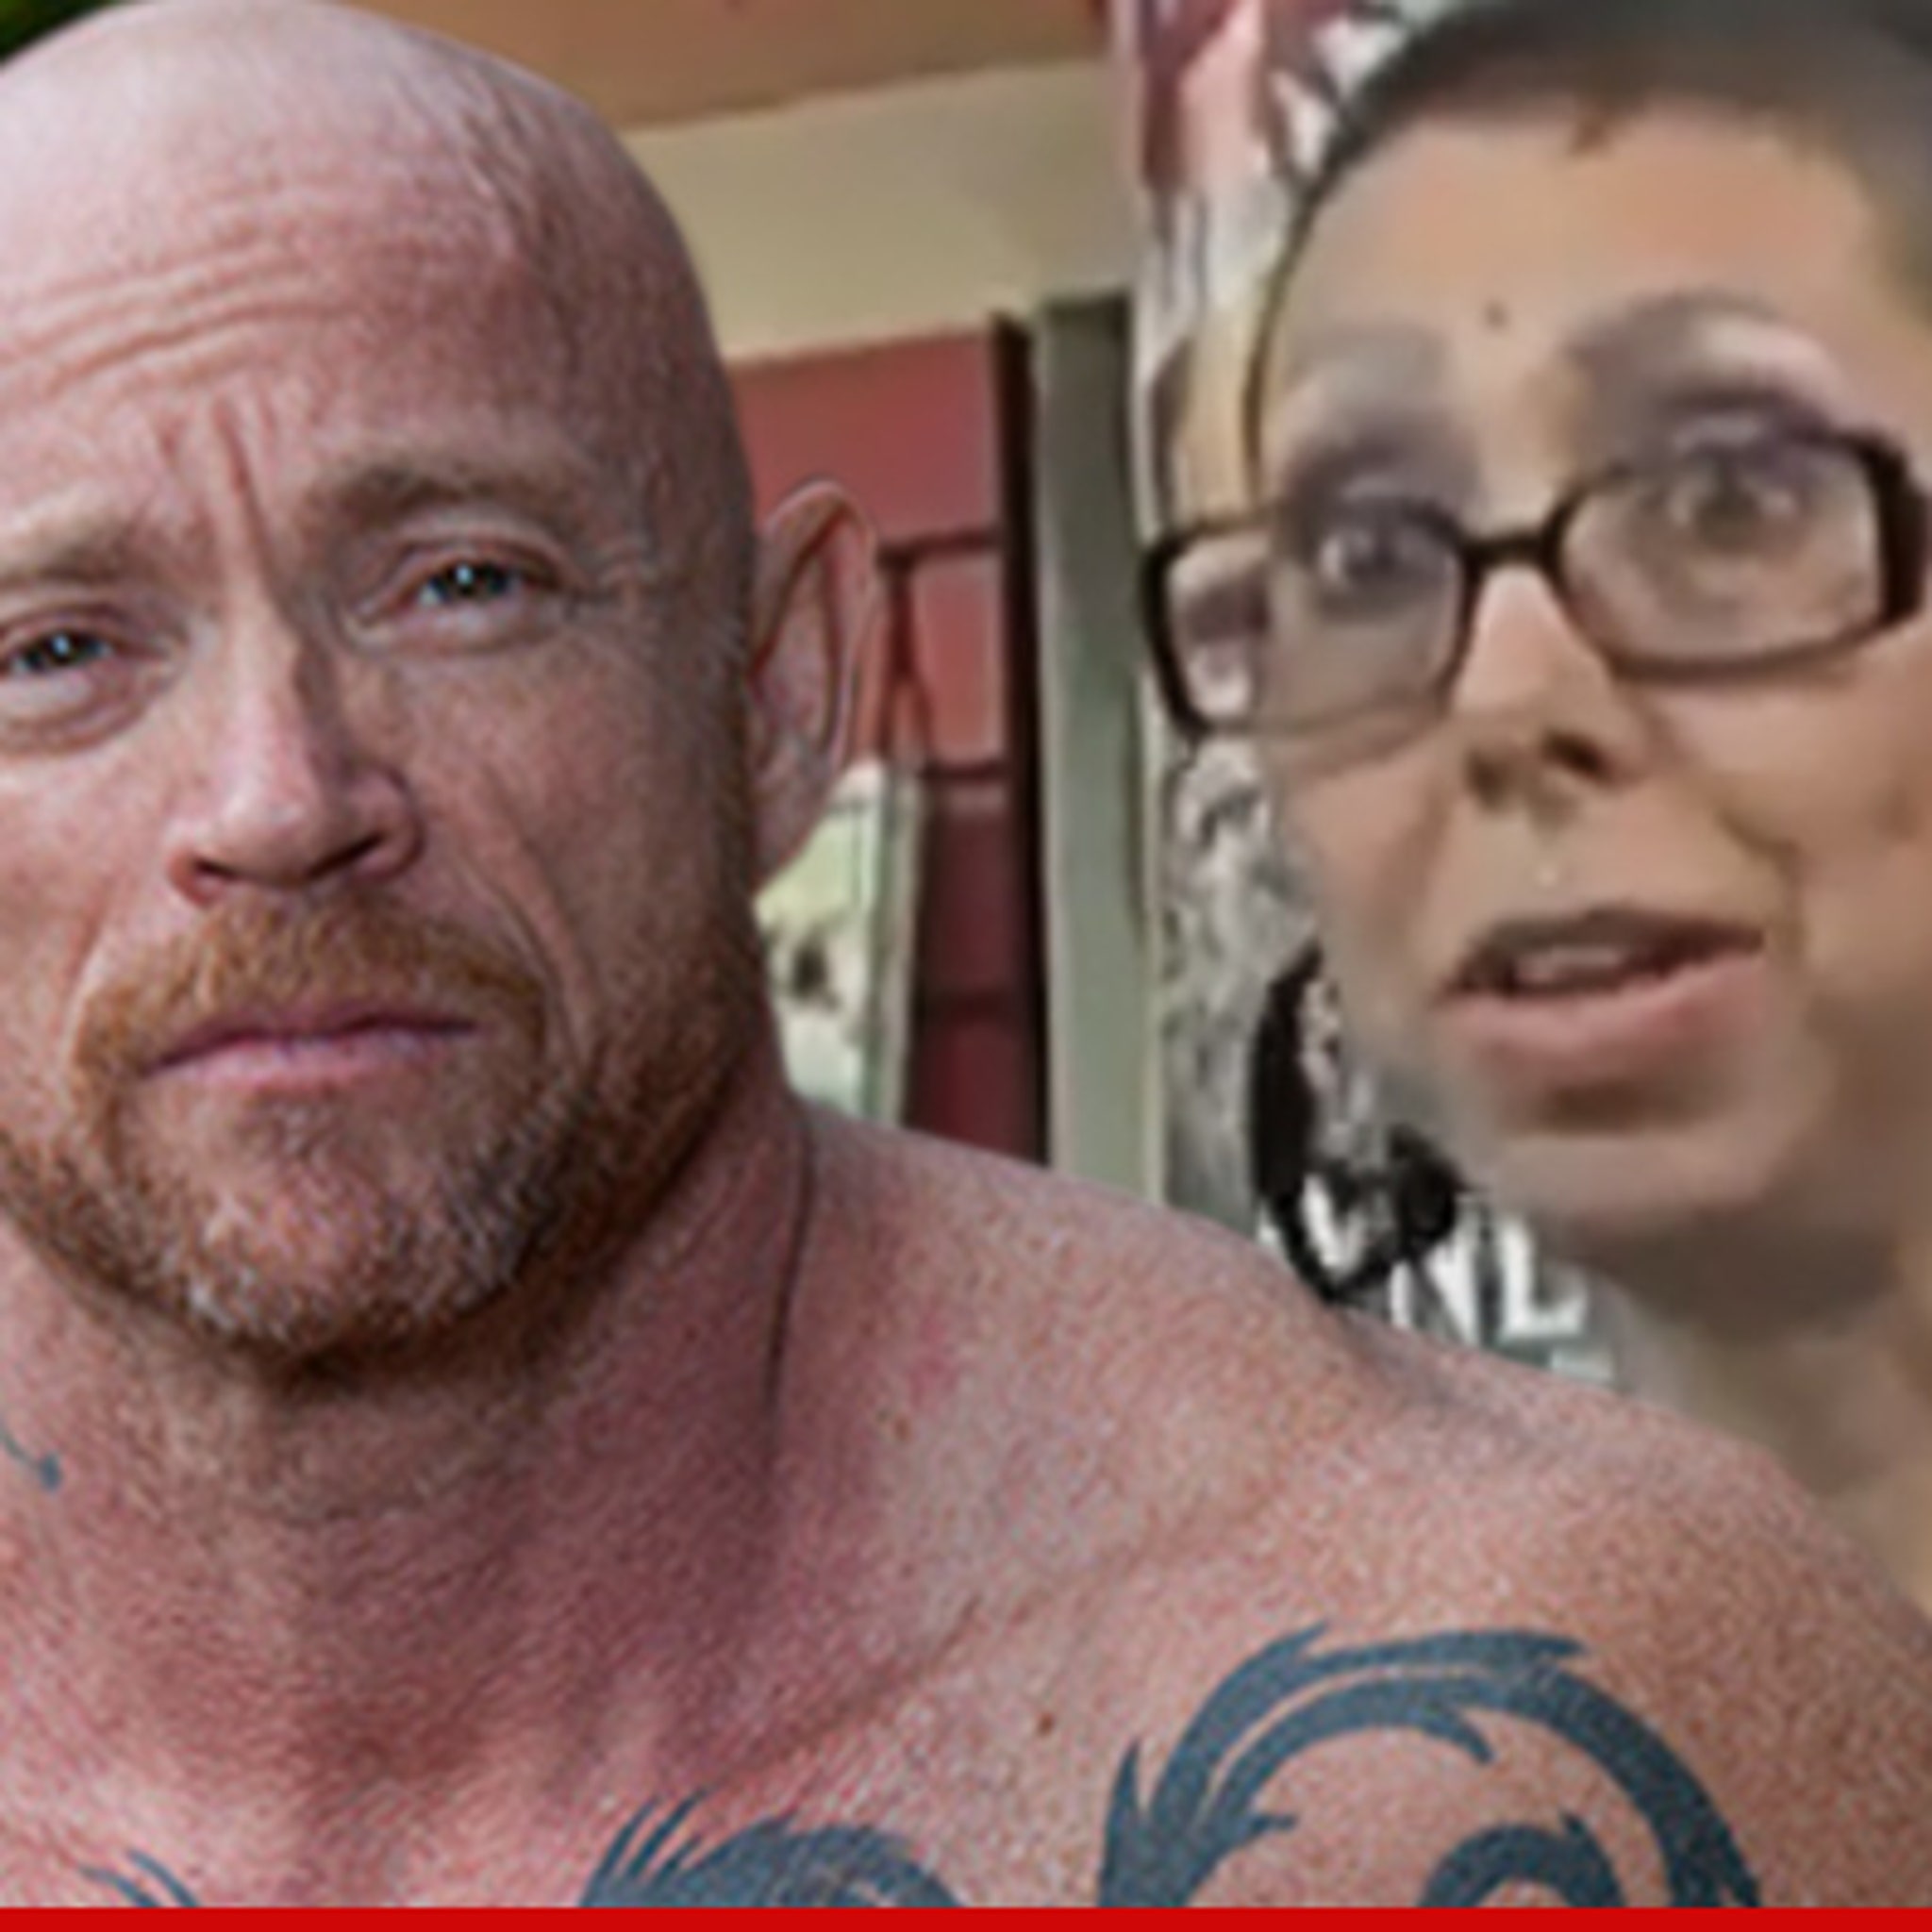 Forced By Tranny - Transsexual Porn Star Buck Angel -- I'm a Man, Baby! Now I Can Get Divorced